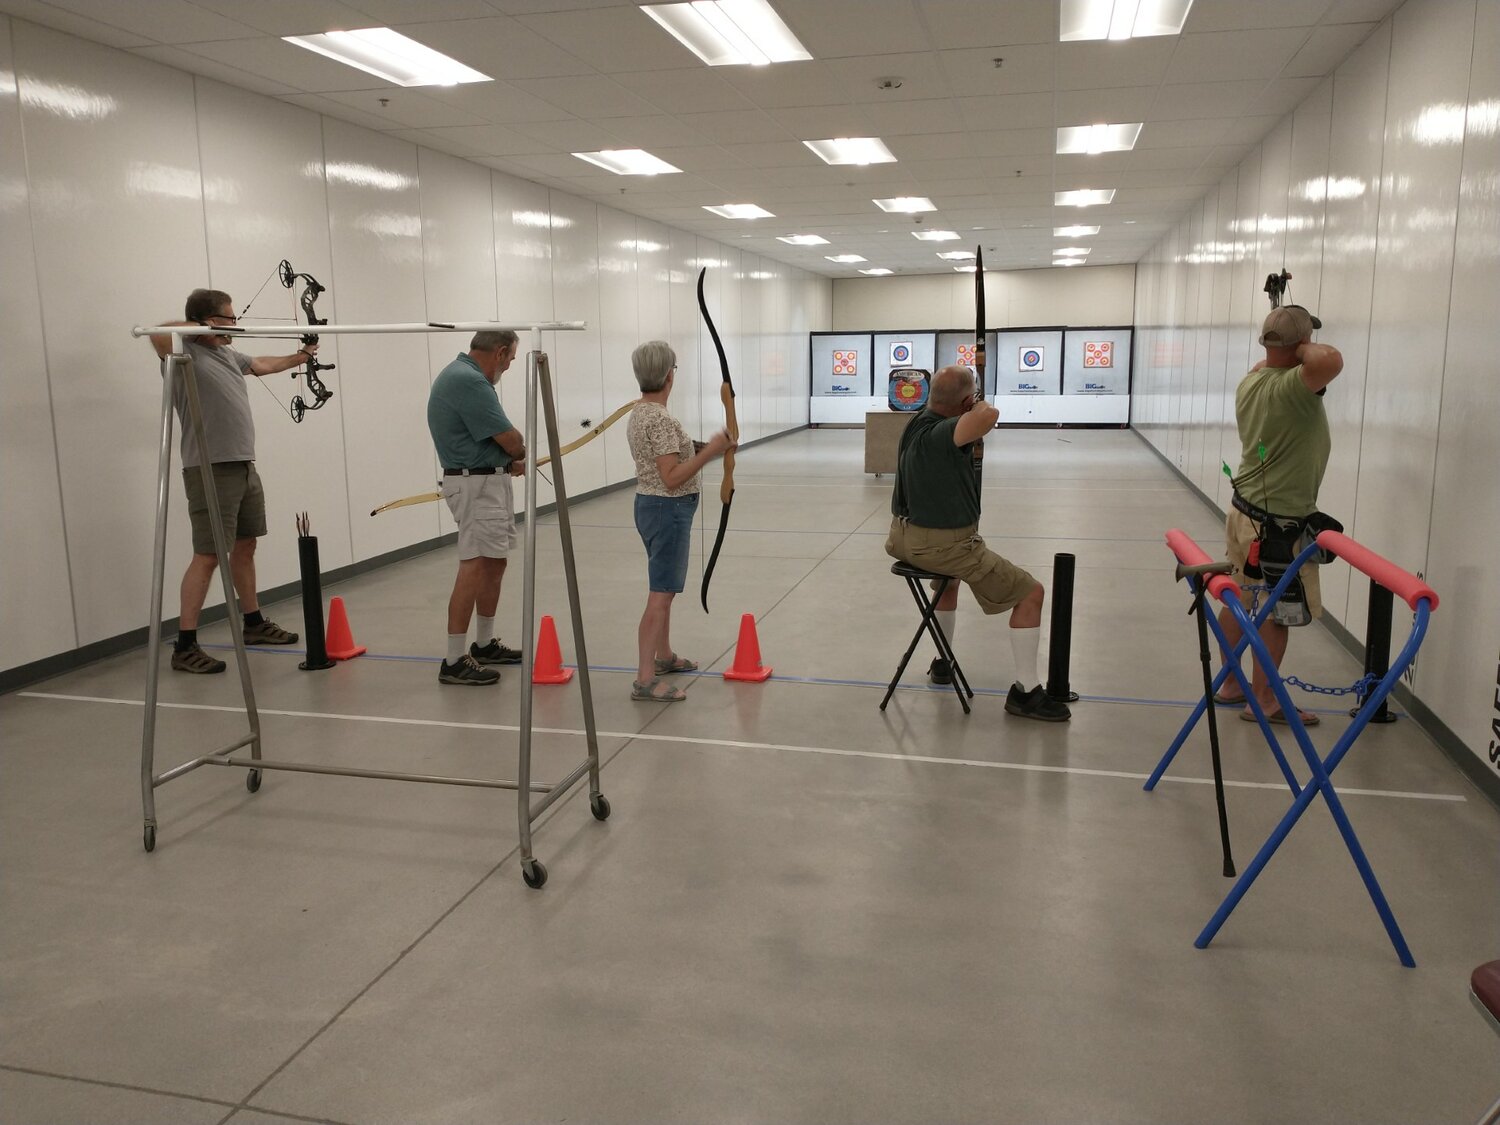 Pictured are members at a recent archery event.